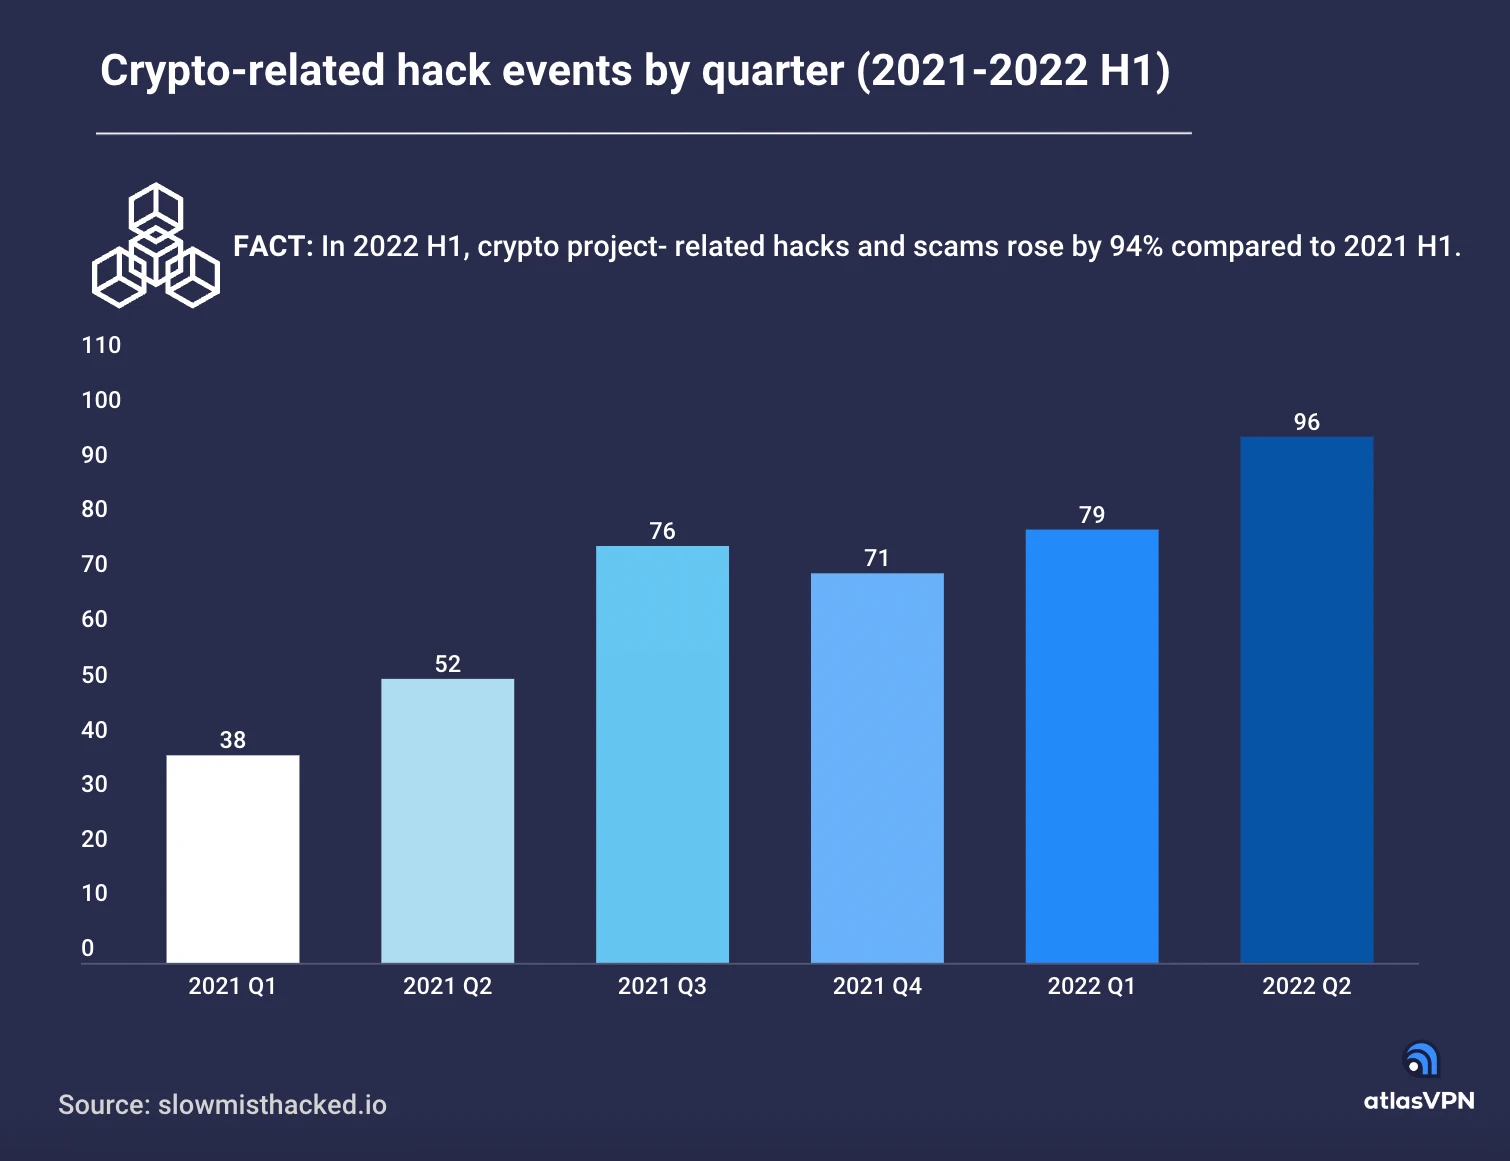 A chart showing crypto-related hack events by quarter in 2021-2022